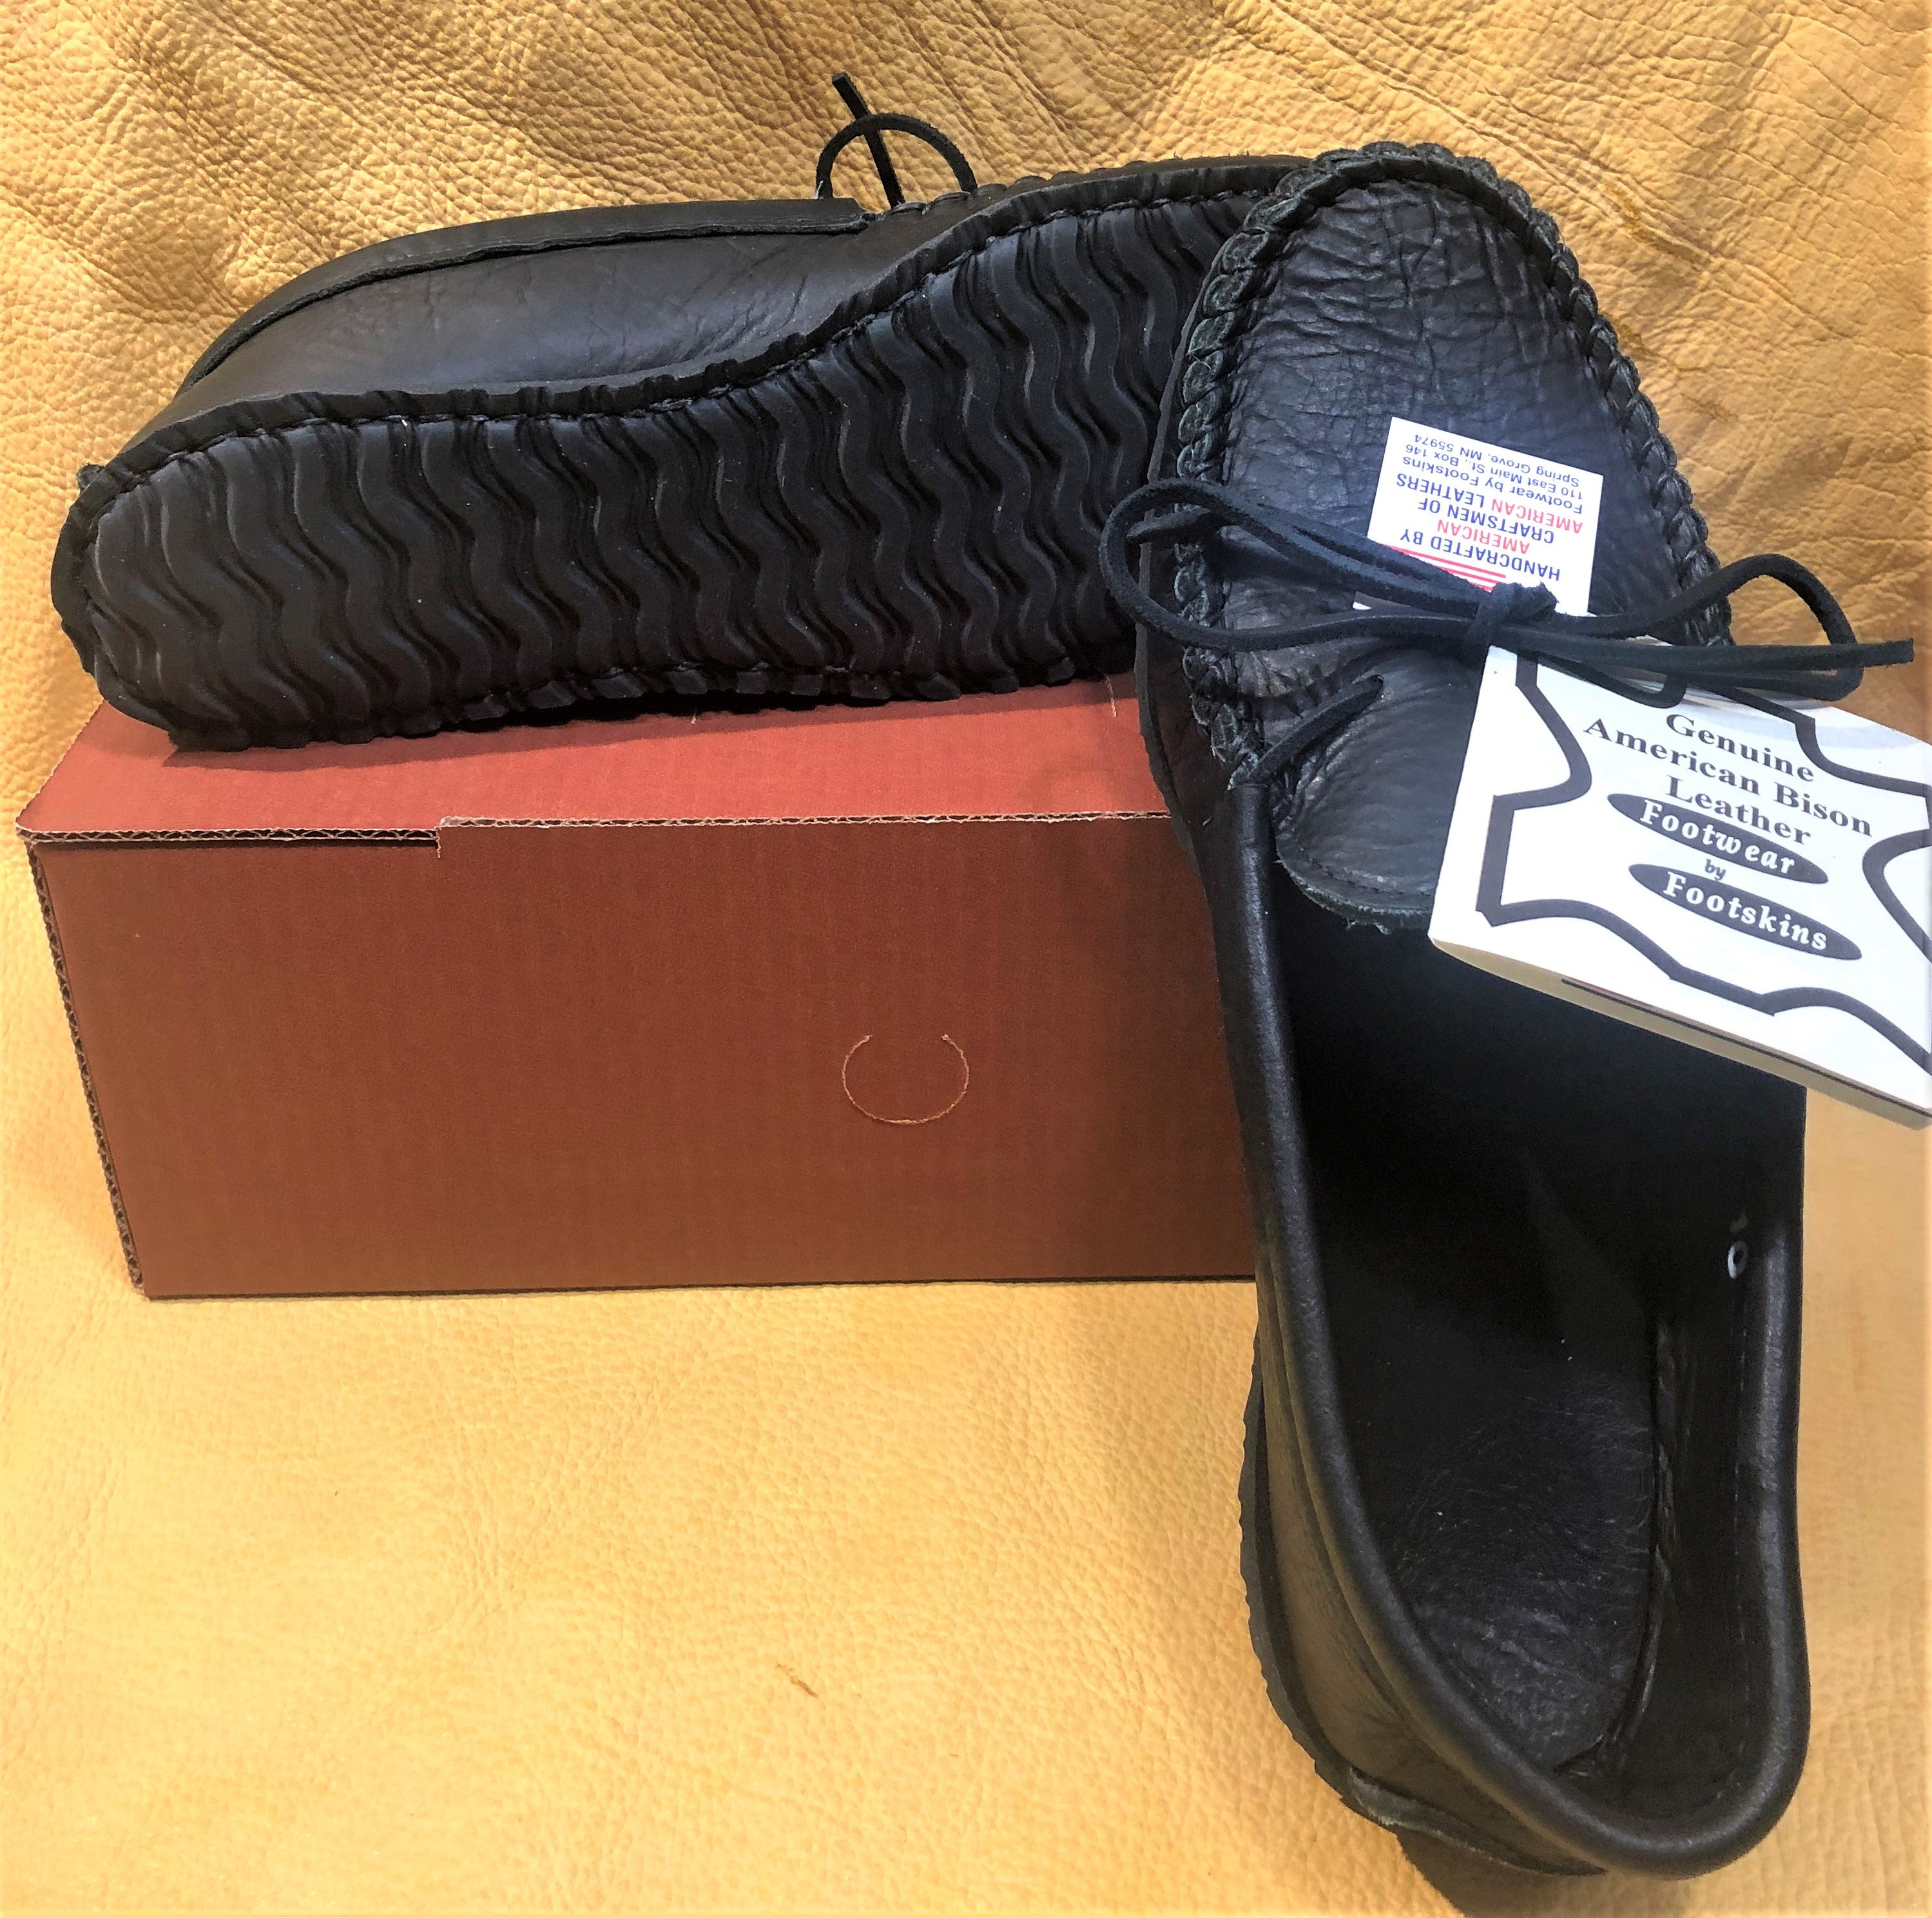 "Herd Wear" - bison leather/"Flex-rubber" sole men's house and yard shoe.  Style B-4475-CFS